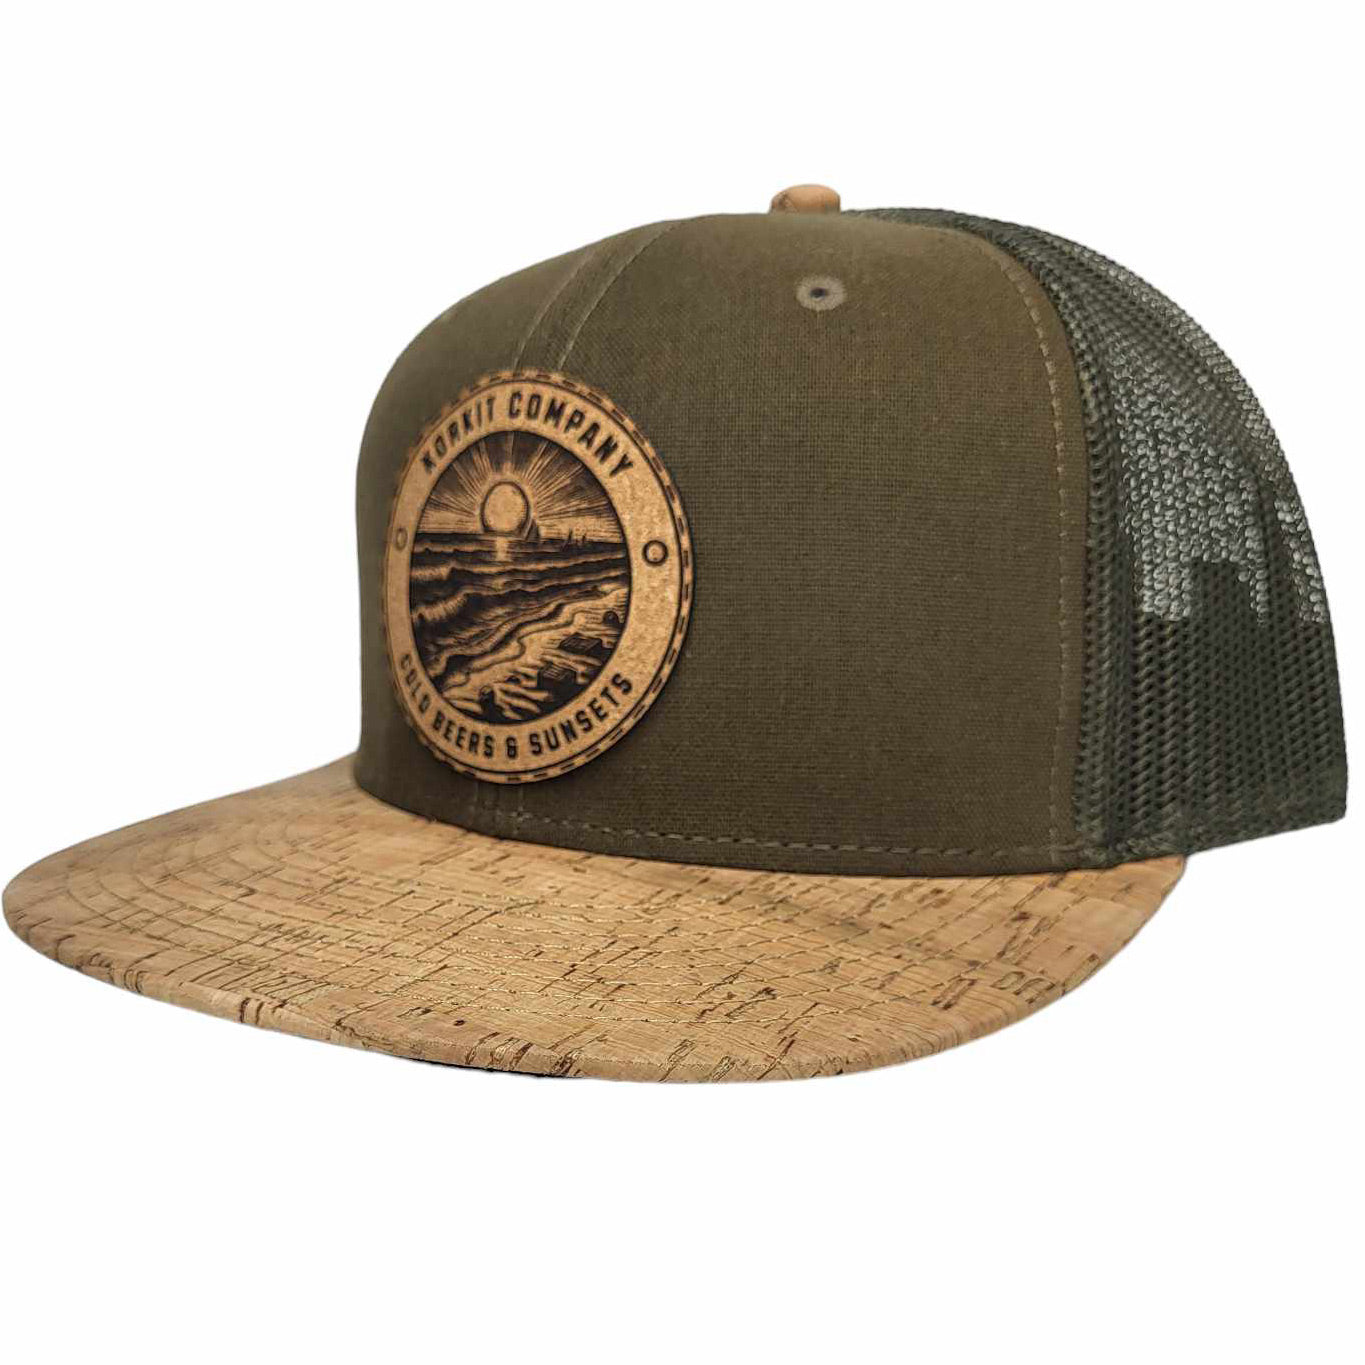 Cold Beers & Sunsets Flat Bill Snapback